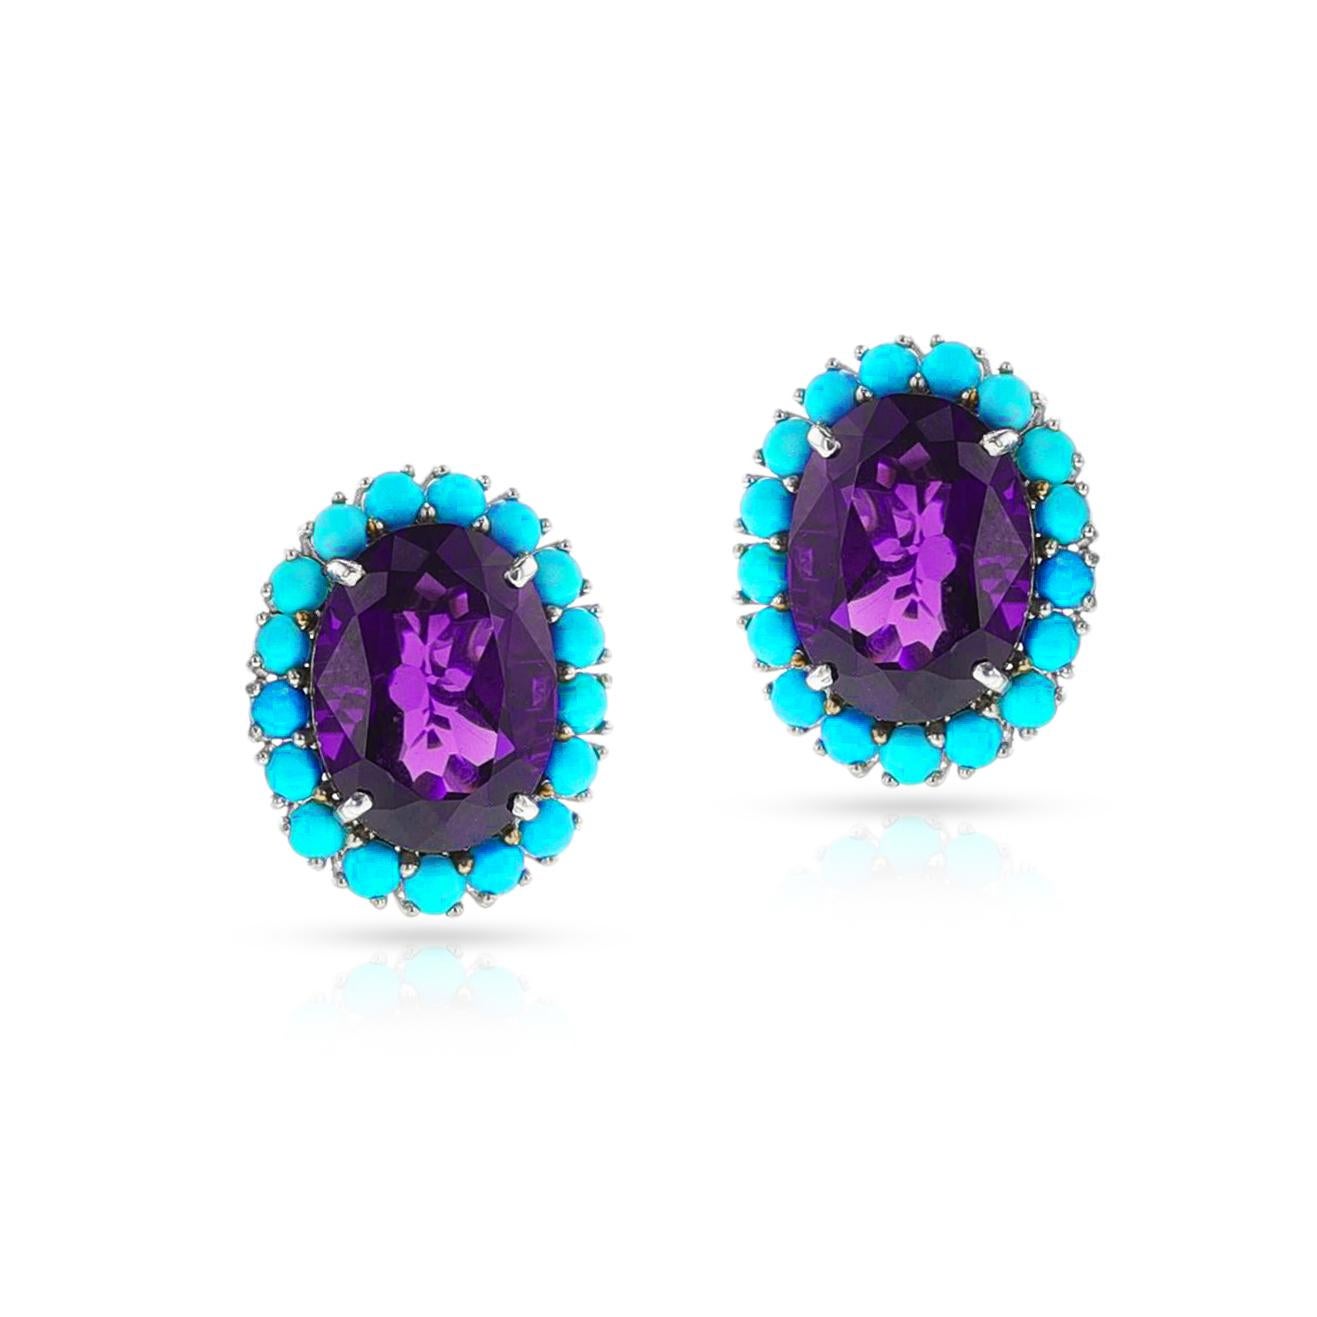 A pair of Oval Amethyst Cut and Turquoise Cabochon Earrings made in 18k White Gold. The total weight of the stones is 19.90 carats. The total weight of the earrings is 14.84 grams. The length of the earrings is 0.85